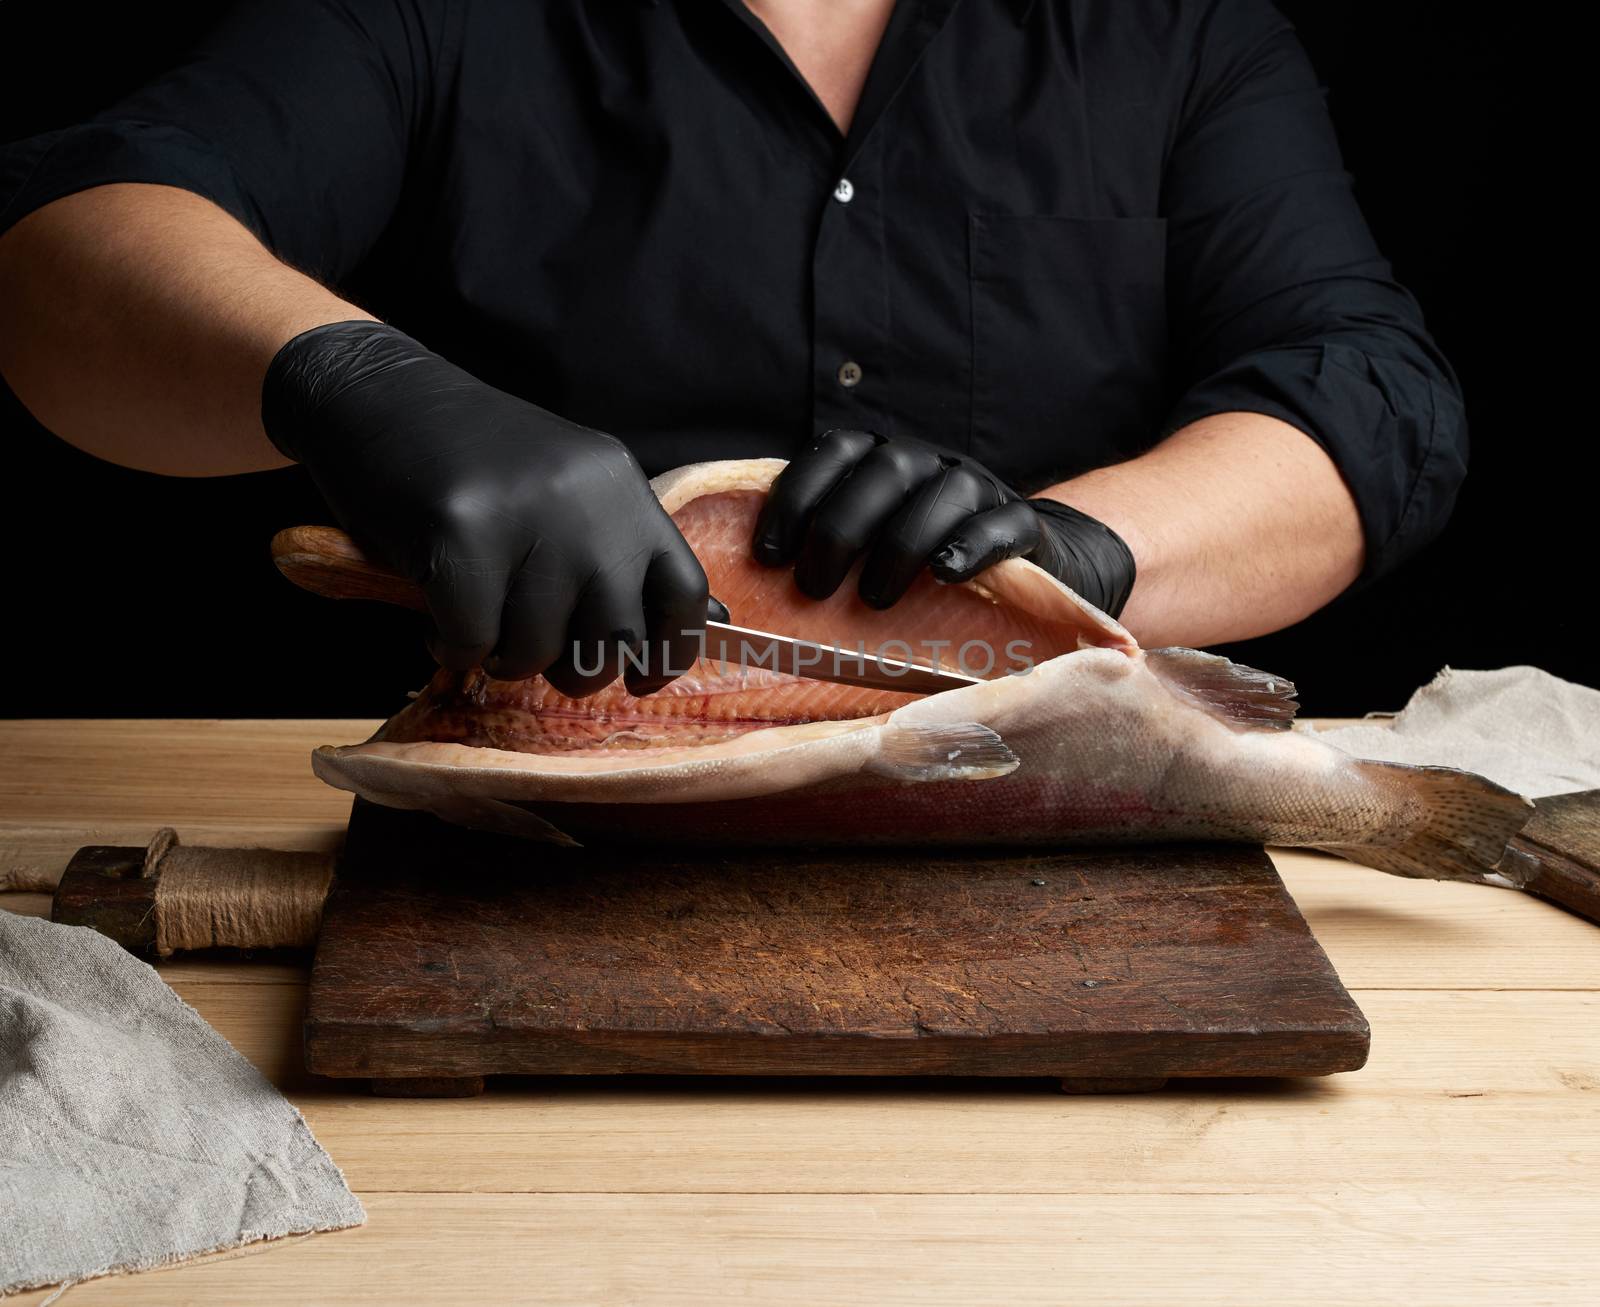 chef in black uniform and black latex gloves cuts a carcass of fresh salmon fish on a wooden cutting board, black background